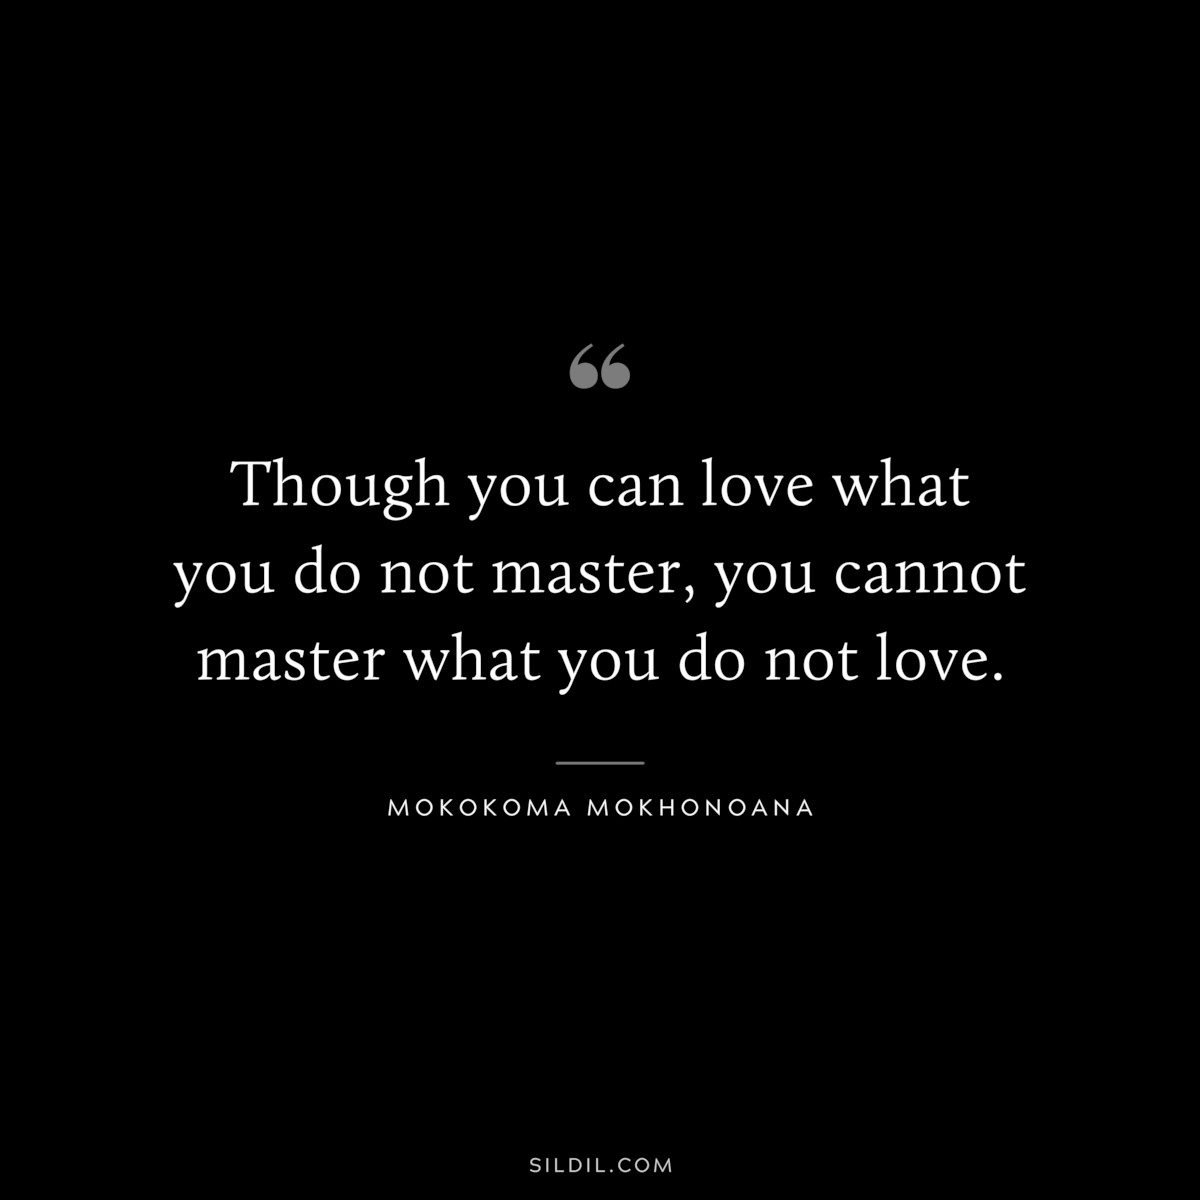 Though you can love what you do not master, you cannot master what you do not love. ― Mokokoma Mokhonoana